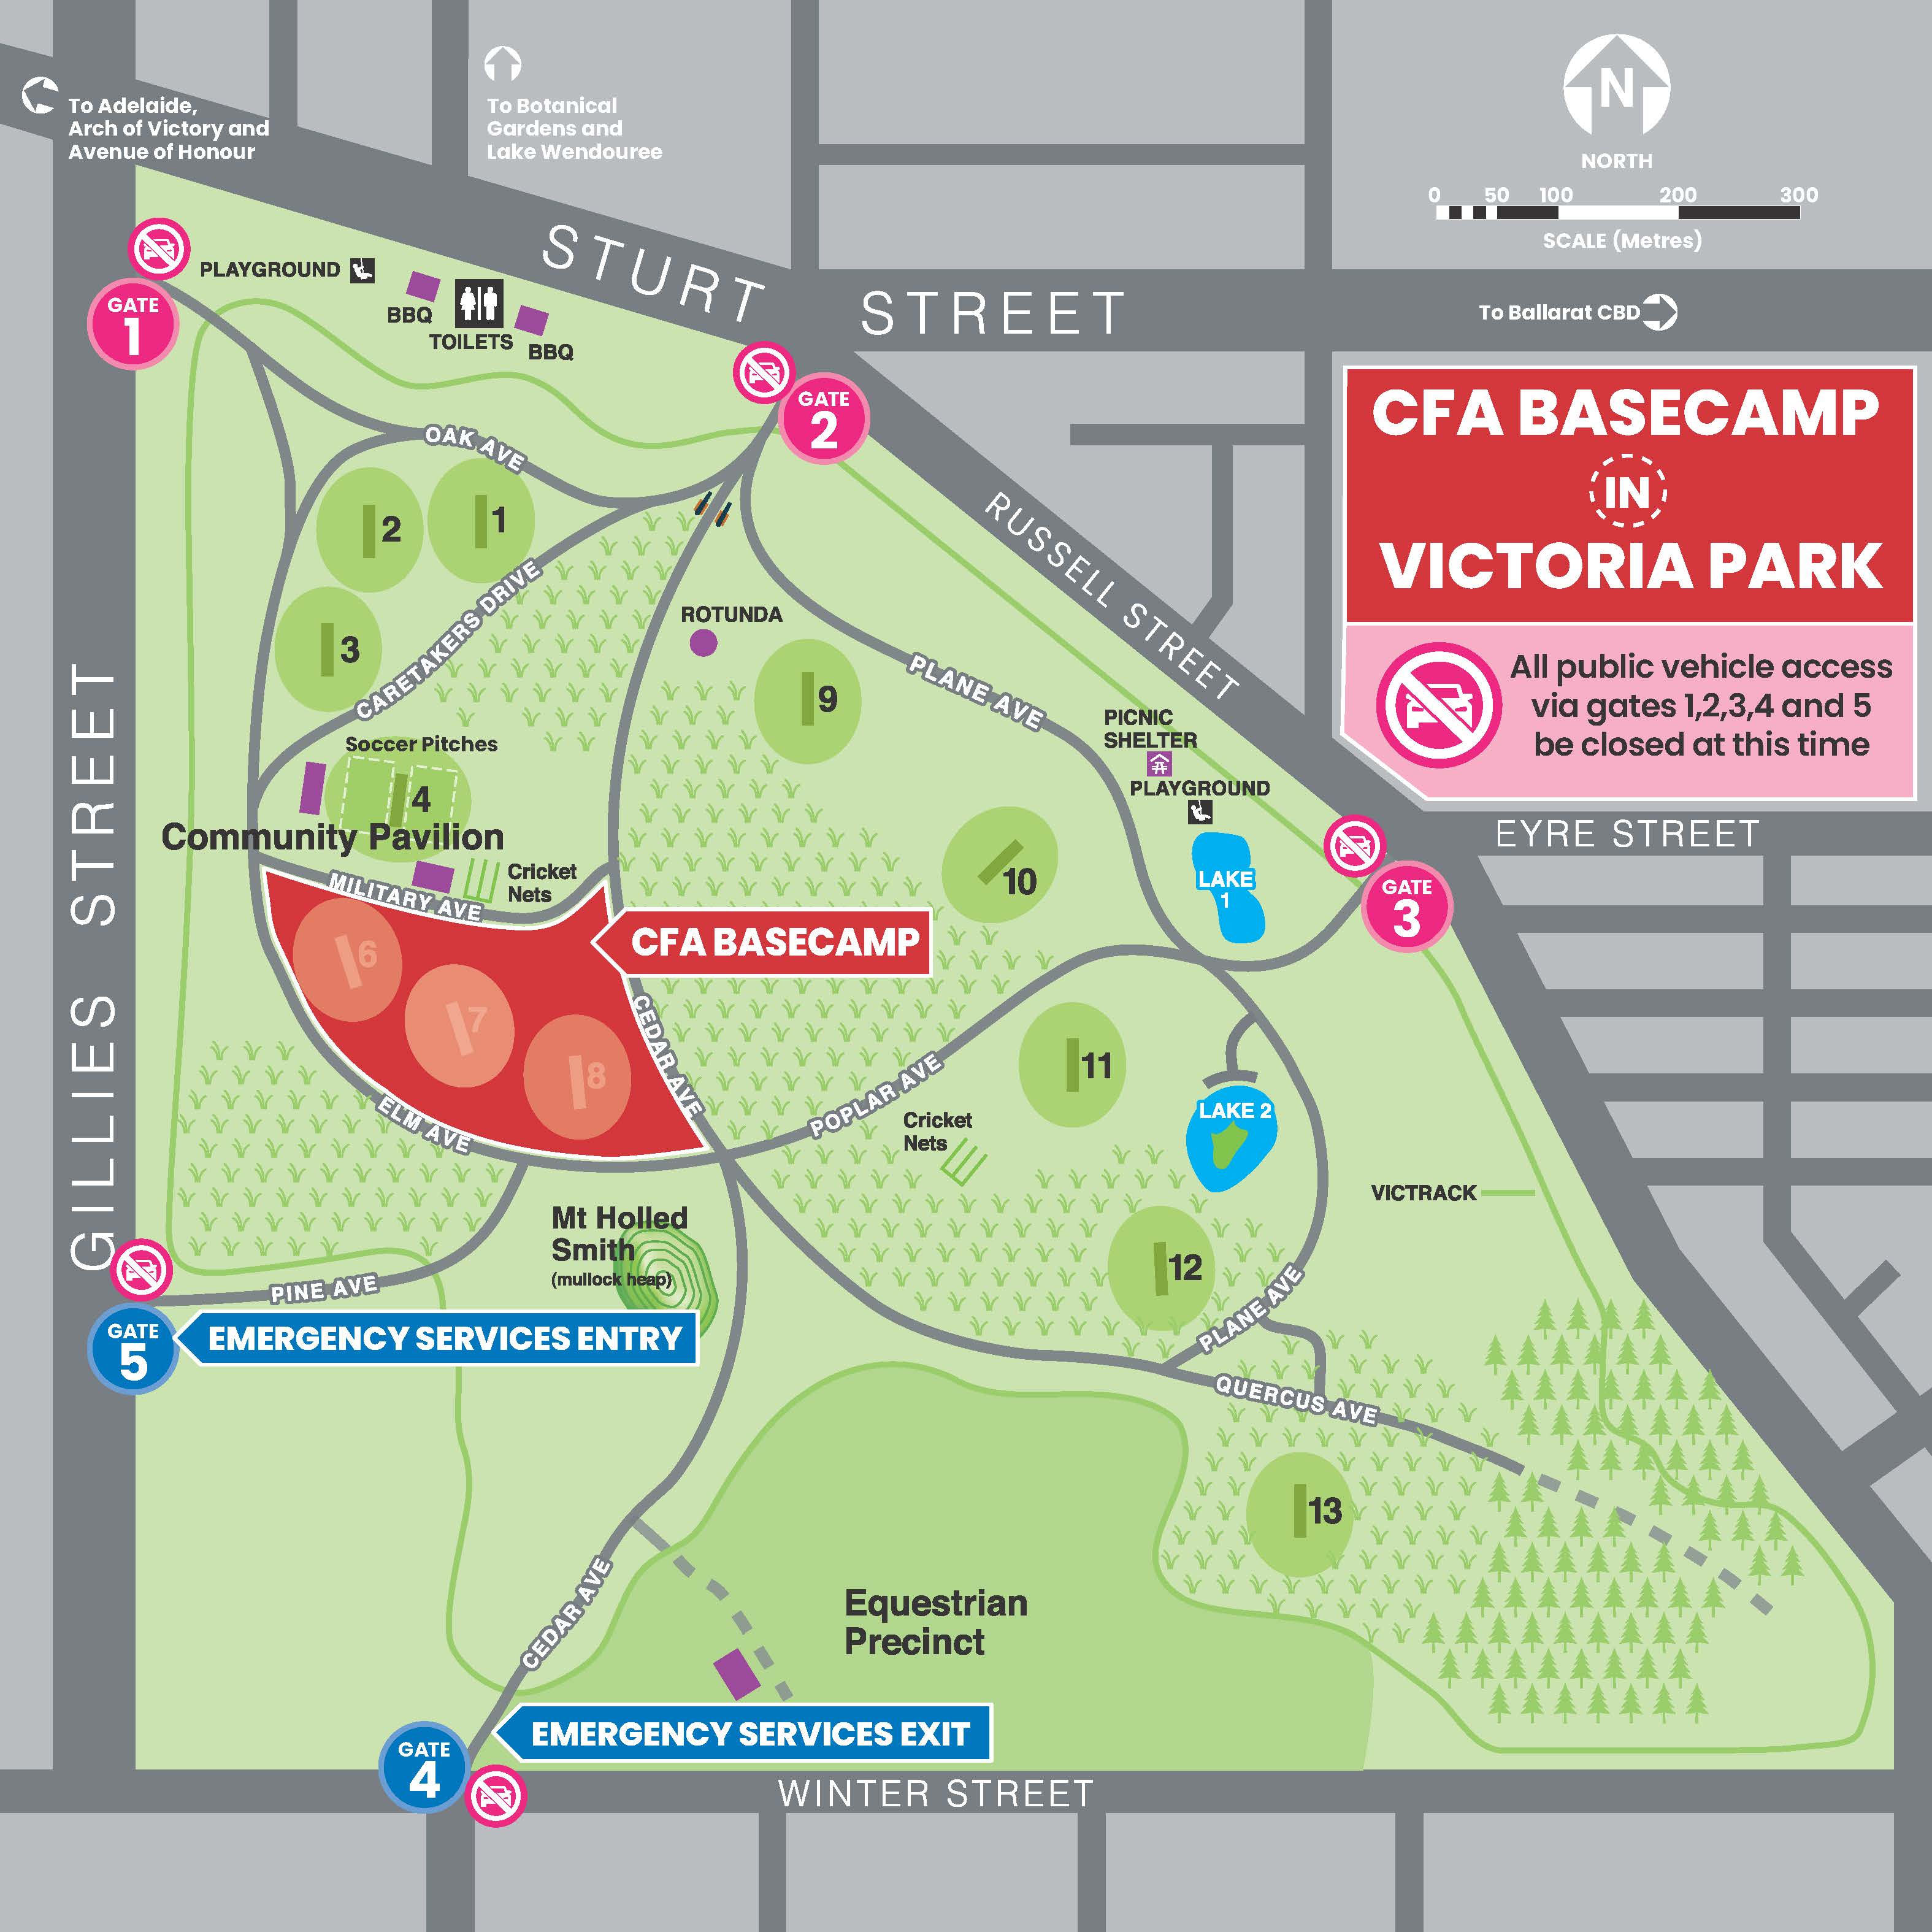 Map of the CFA basecamp in Victoria Park